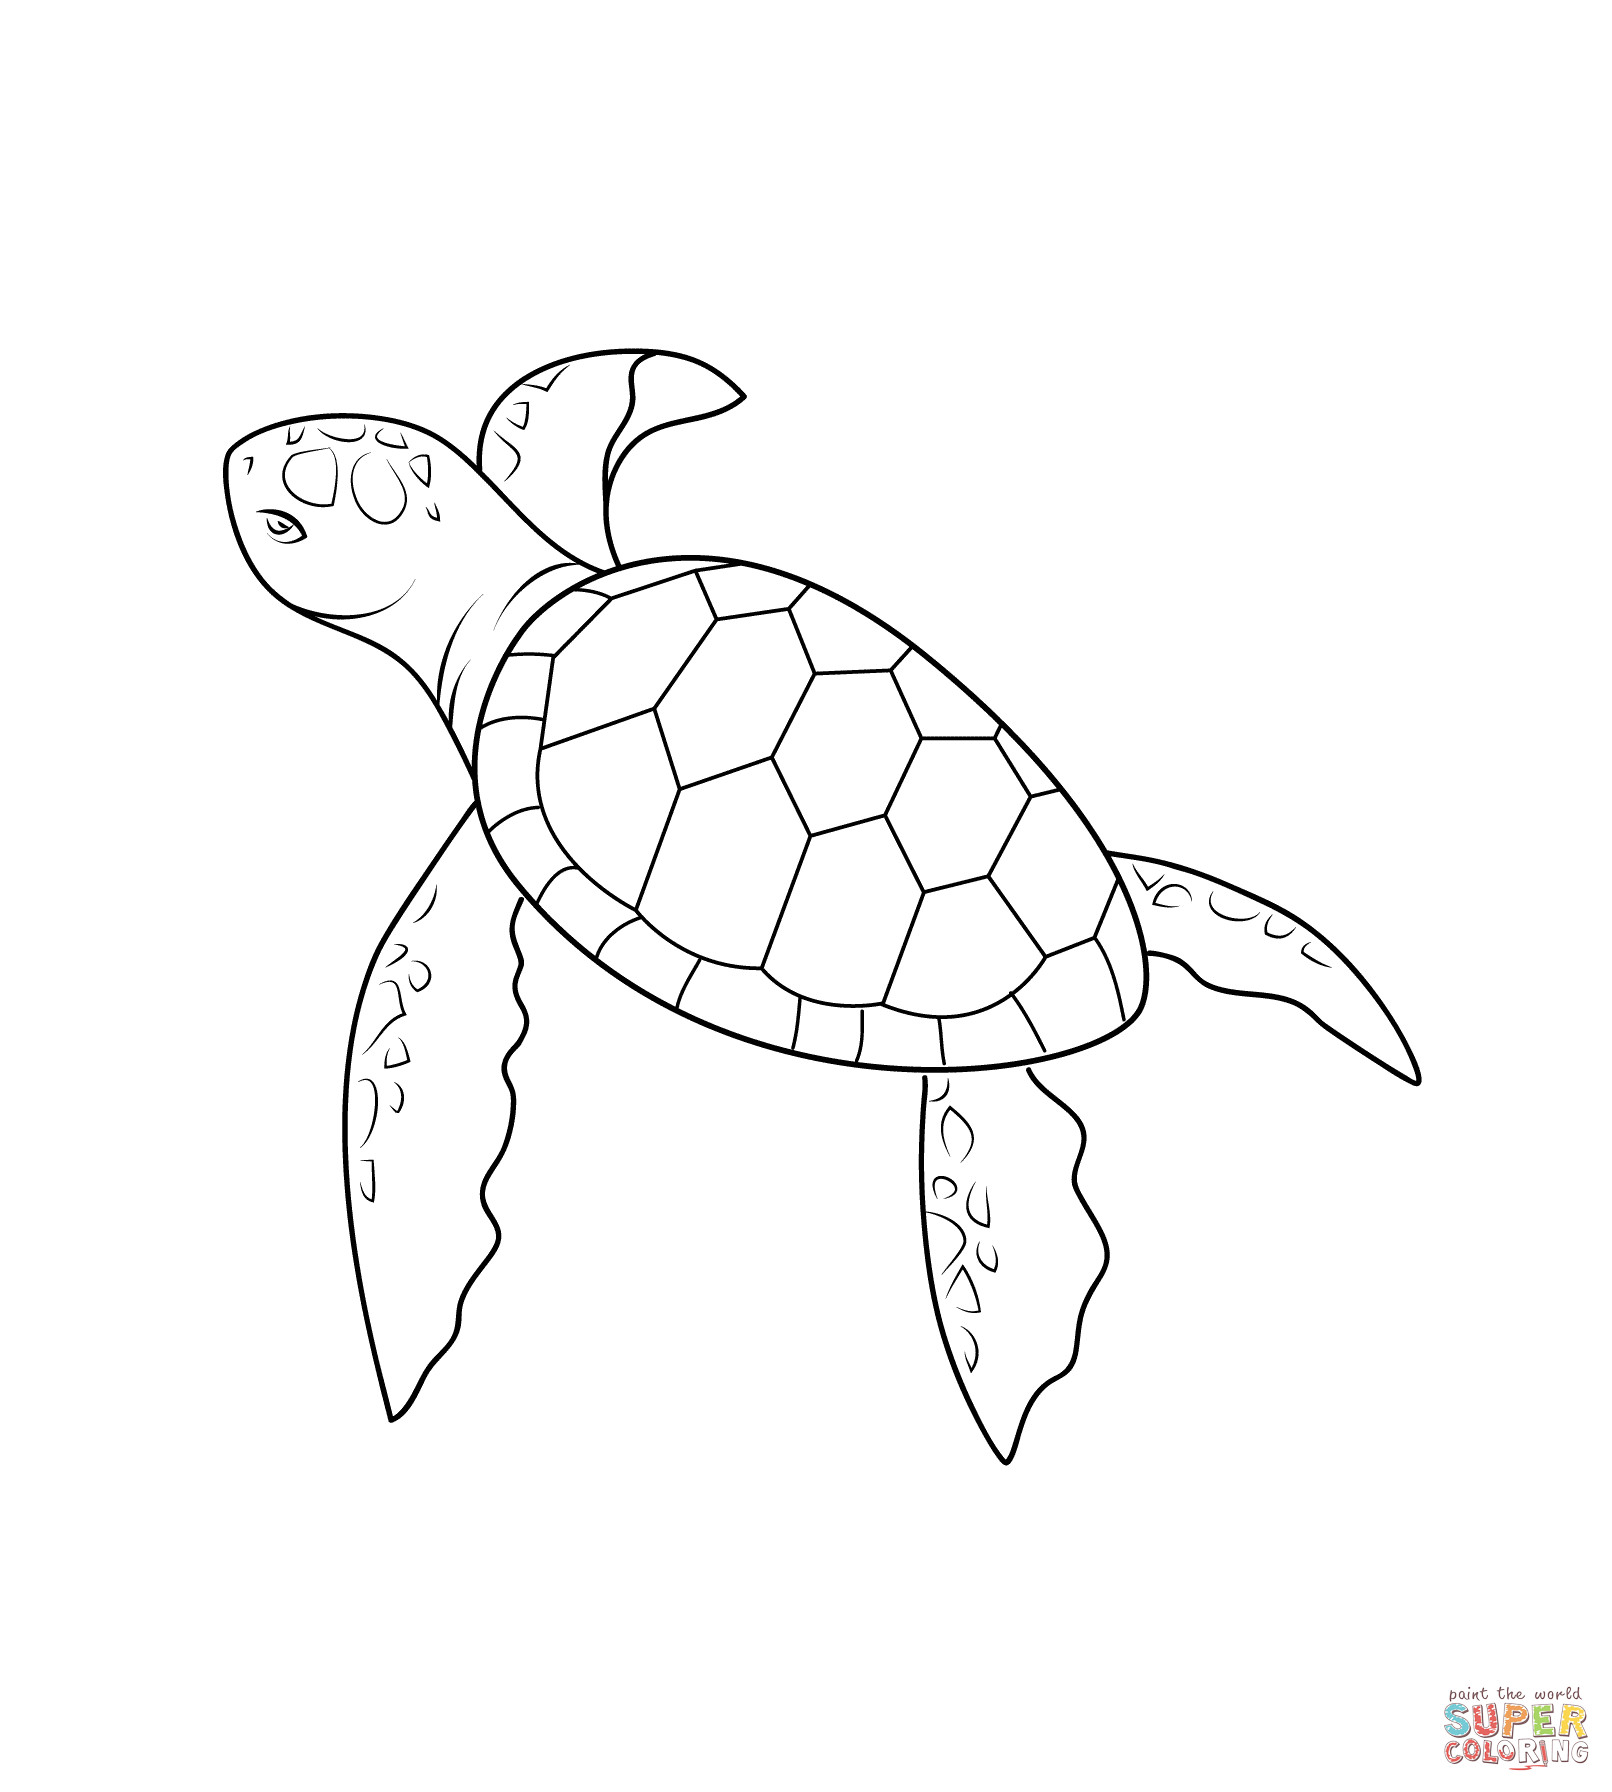 Baby Sea Turtle Coloring Pages
 Baby Turtle coloring page